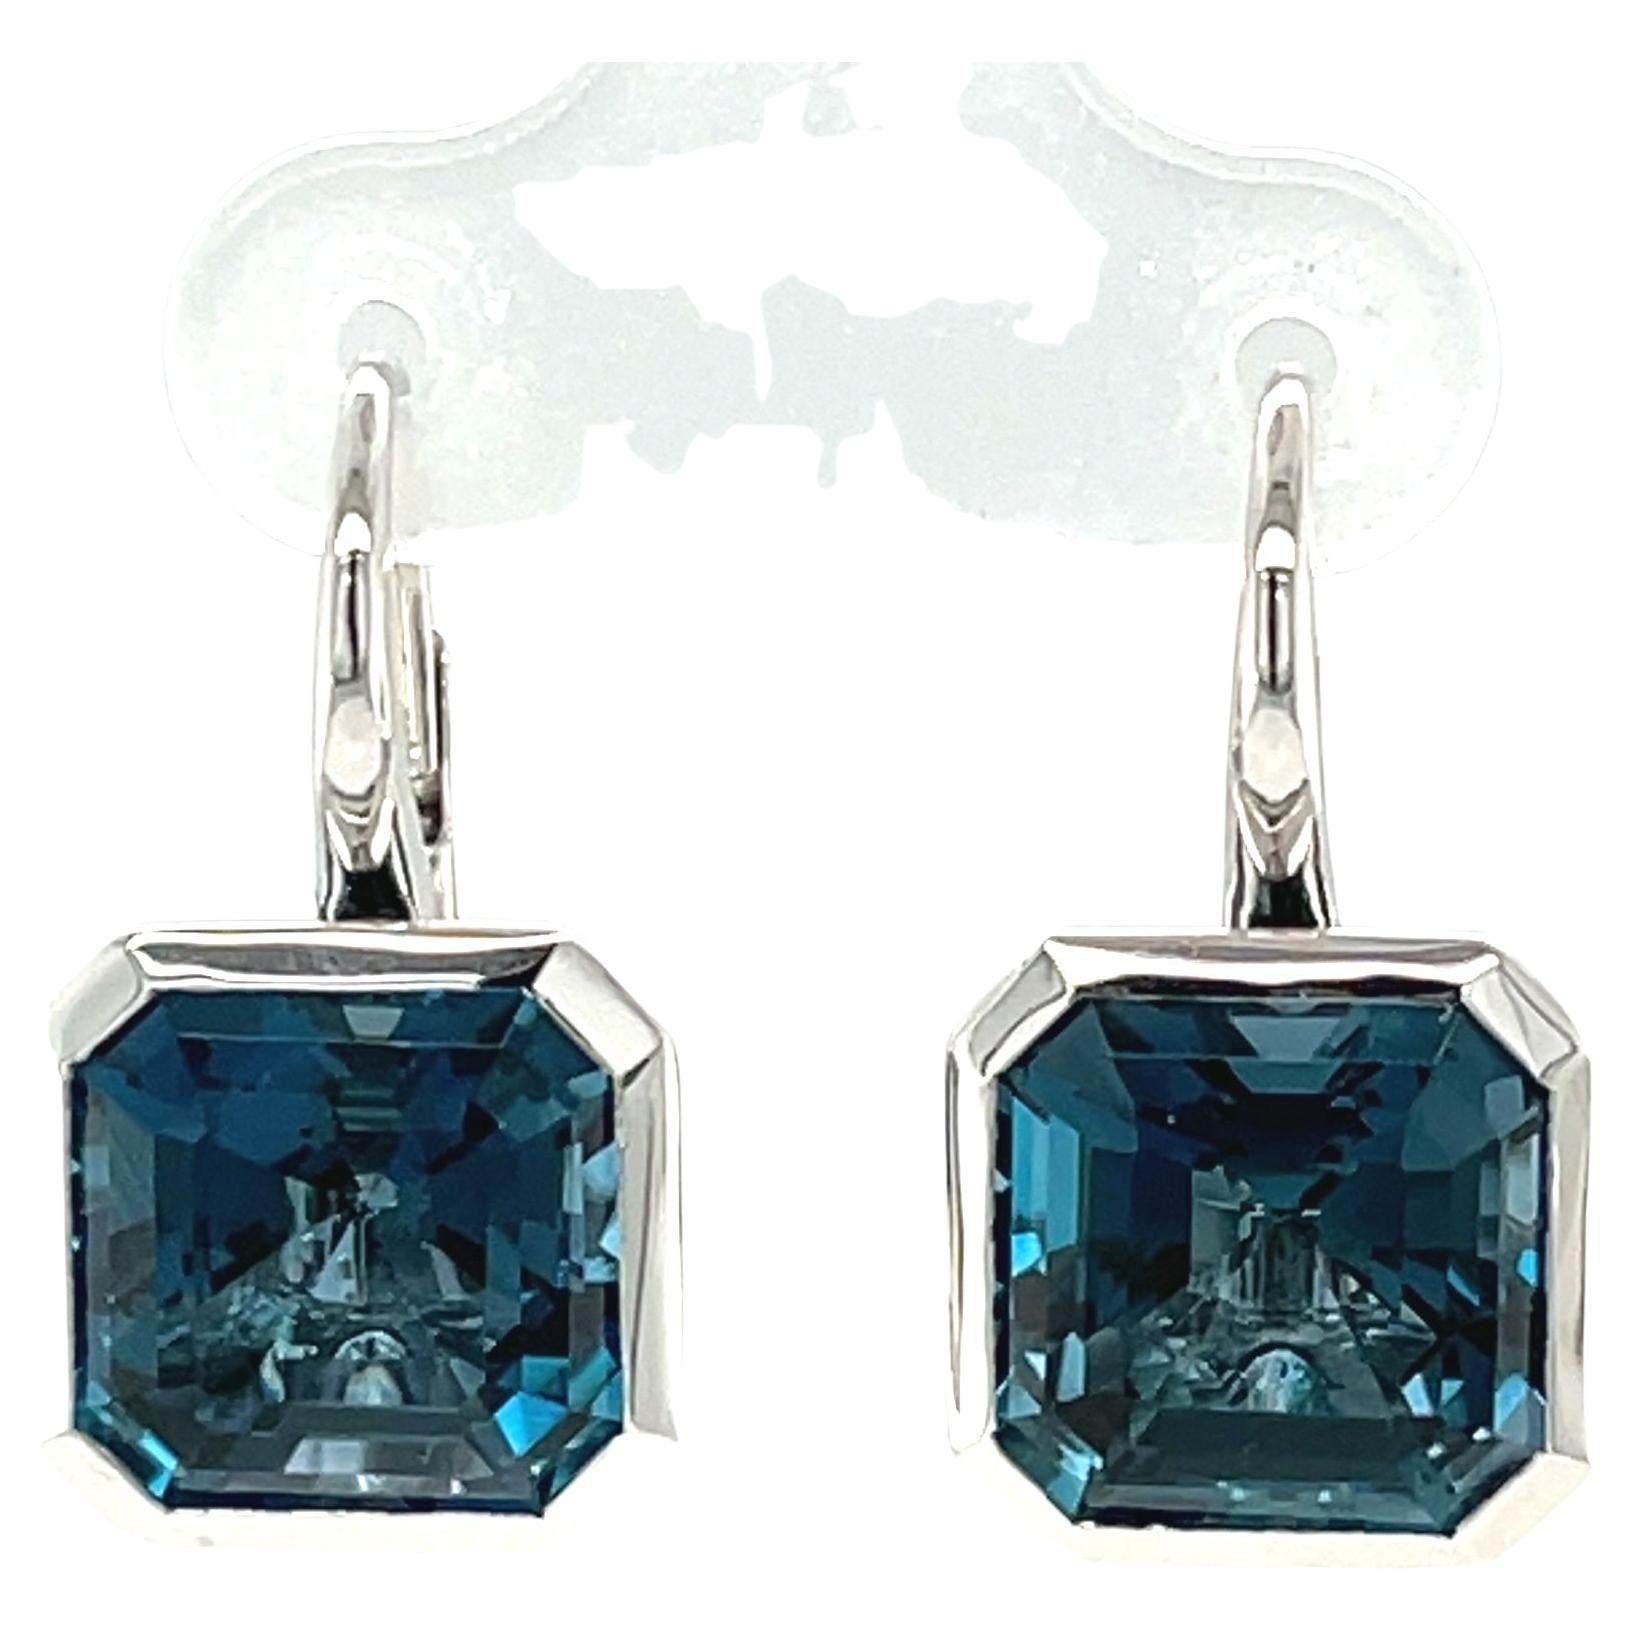 This pair of beautiful London blue topaz earrings will make a perfect addition to both your daytime and evening wardrobes! 